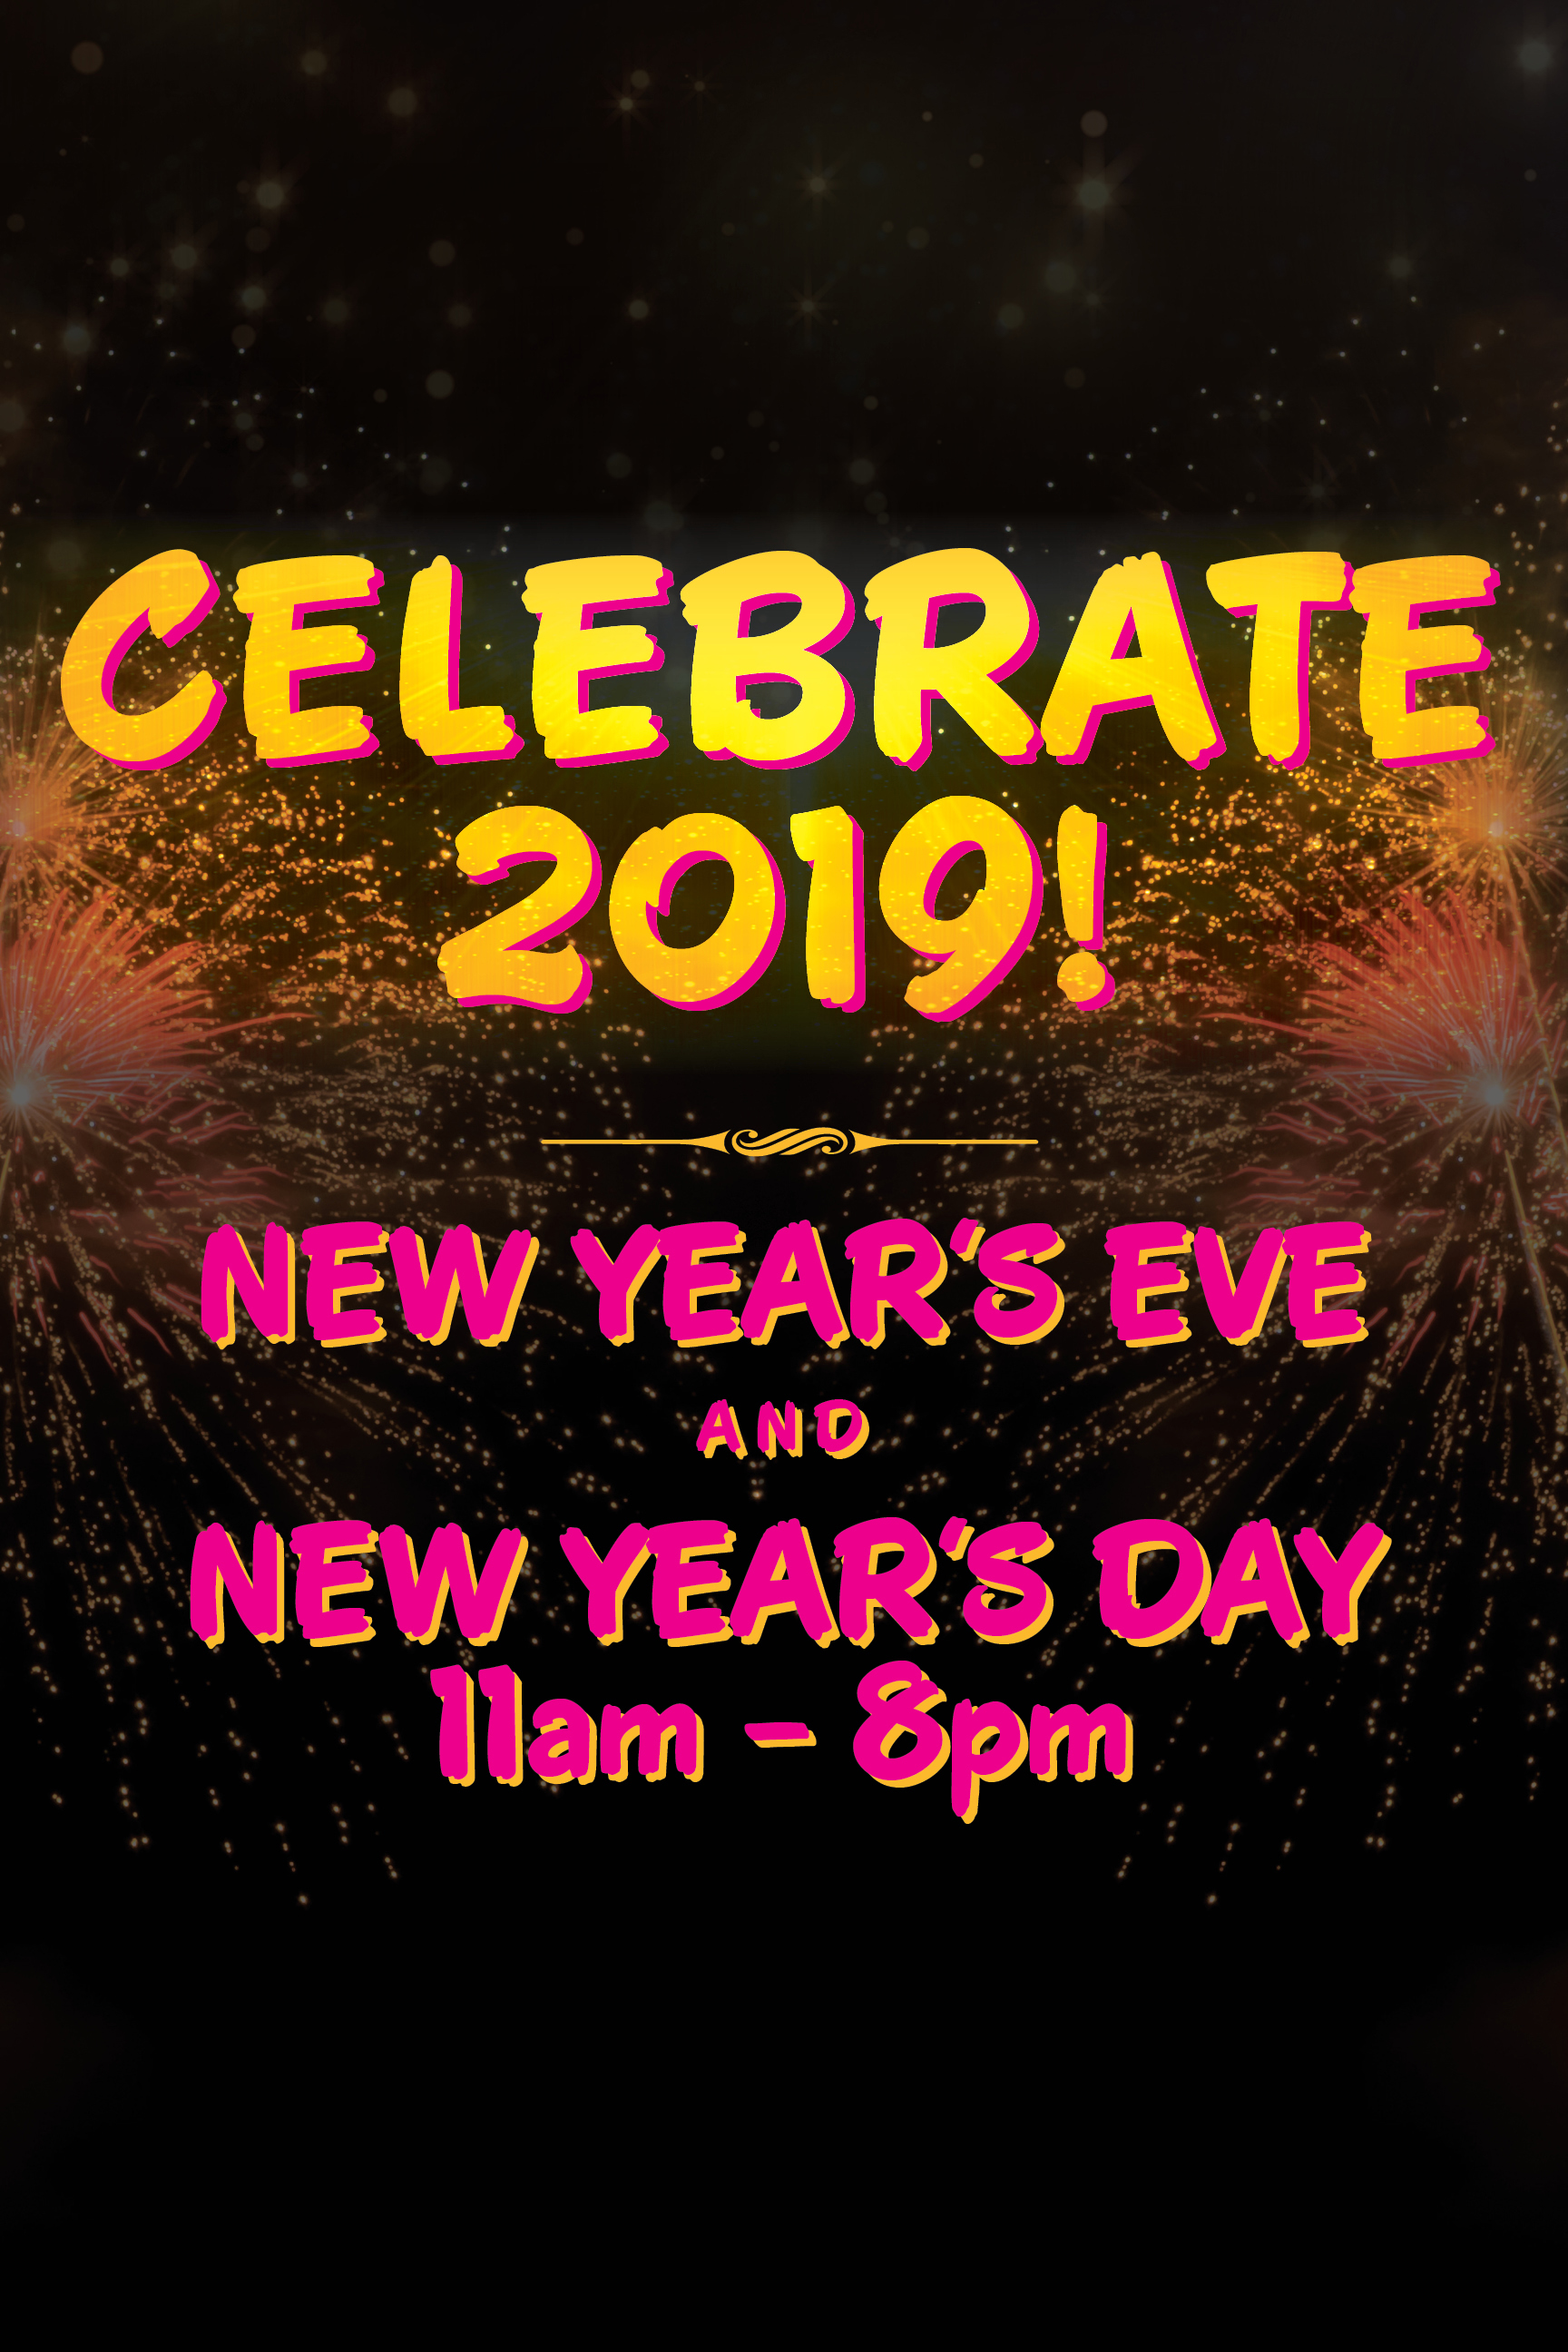 Pleasure Pier is open New Year's Eve and New Year's Day from 11am - 8pm.